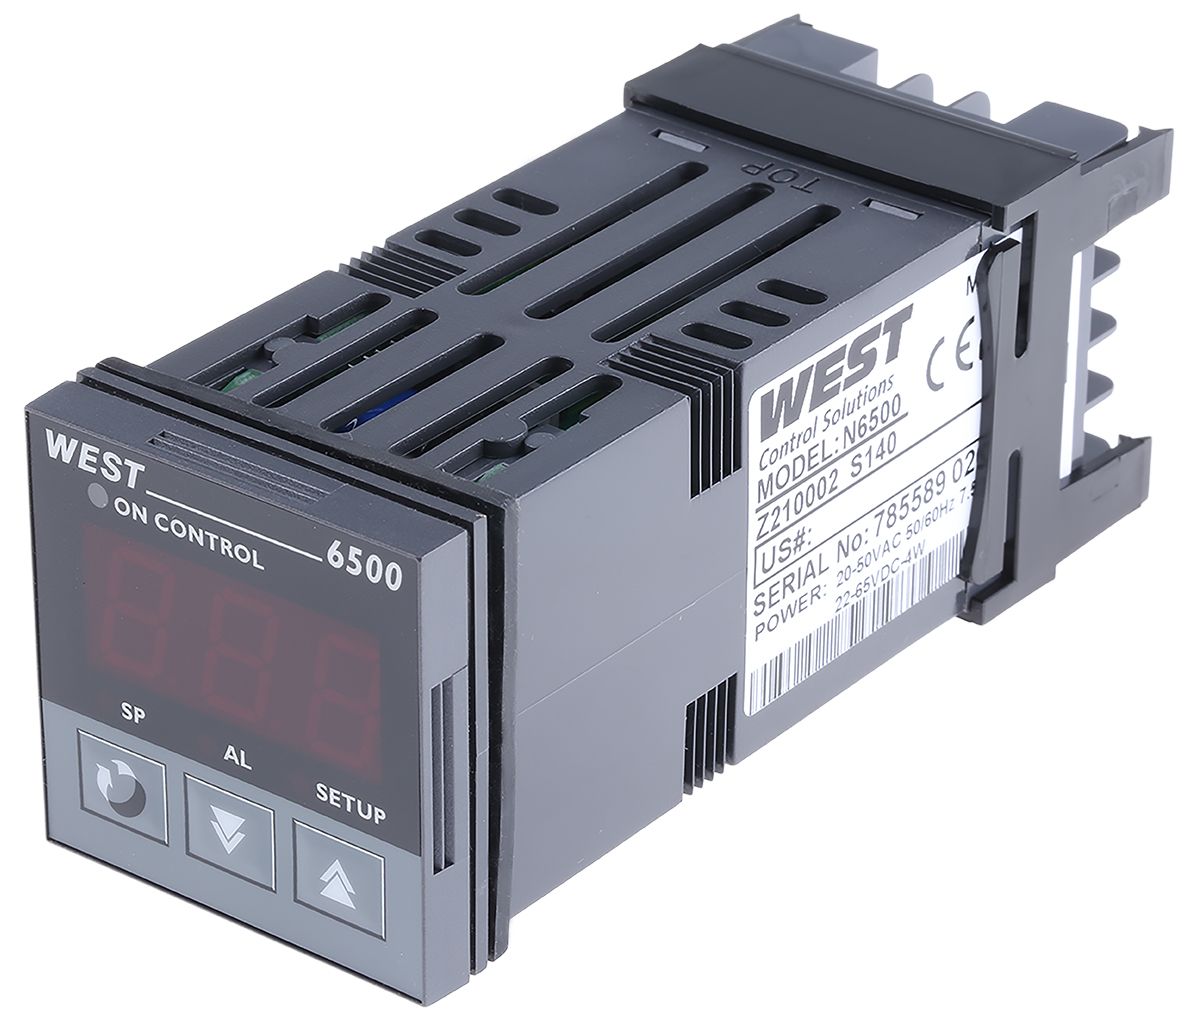 West Instruments N6500 PID Temperature Controller, 48 x 48 (1/16 DIN)mm, 1 Output Relay, 24 → 48 V ac/dc Supply